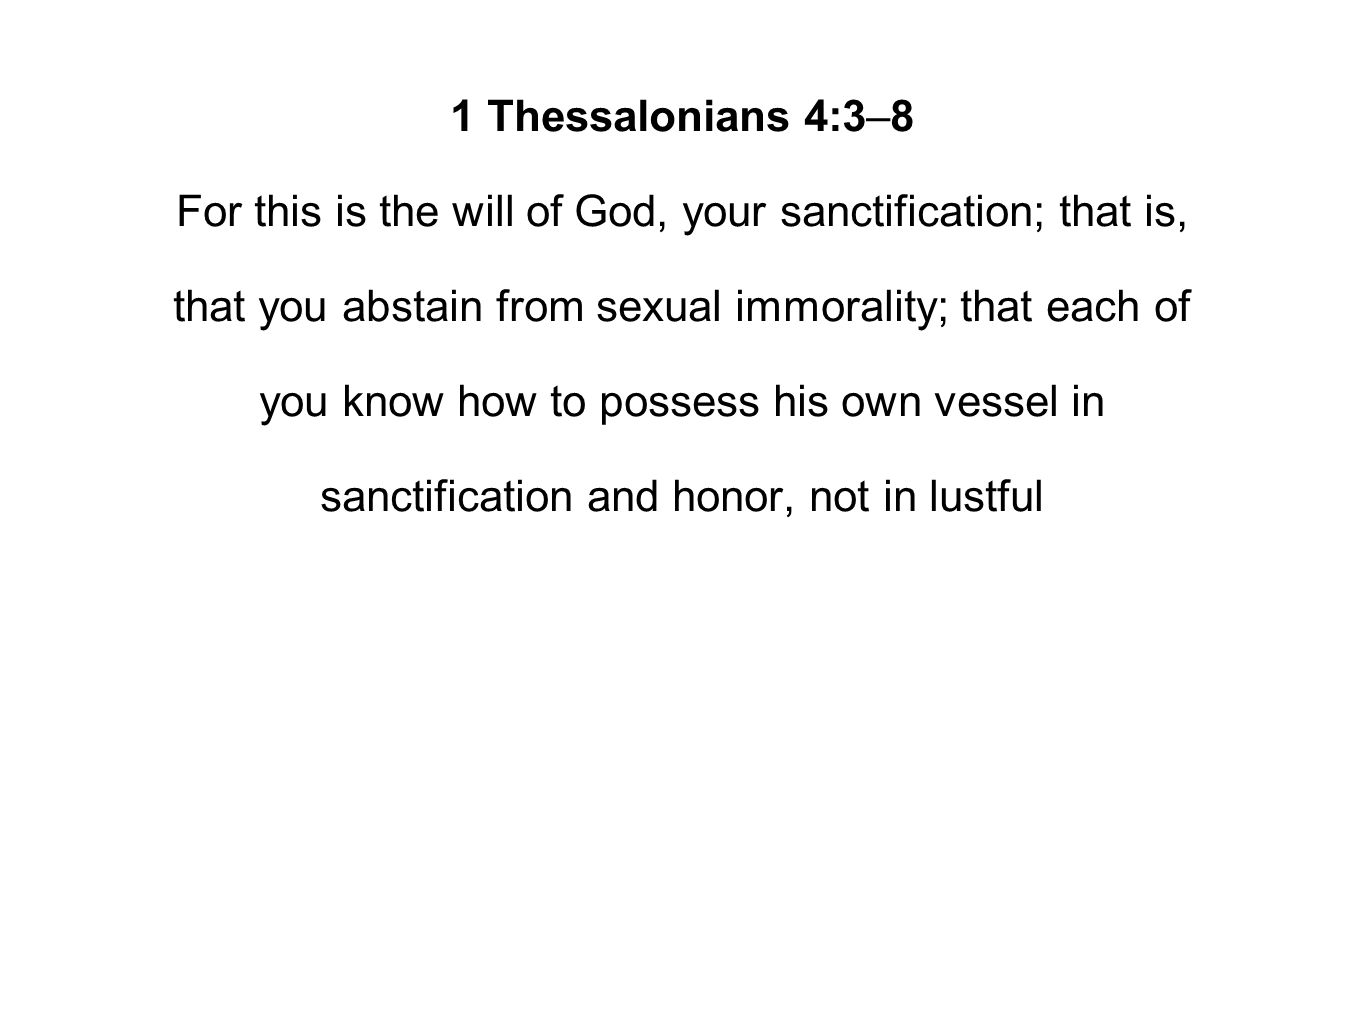 1 Thessalonians 4:3–8 For this is the will of God, your sanctification; that is, that you abstain from sexual immorality; that each of you know how to possess his own vessel in sanctification and honor, not in lustful